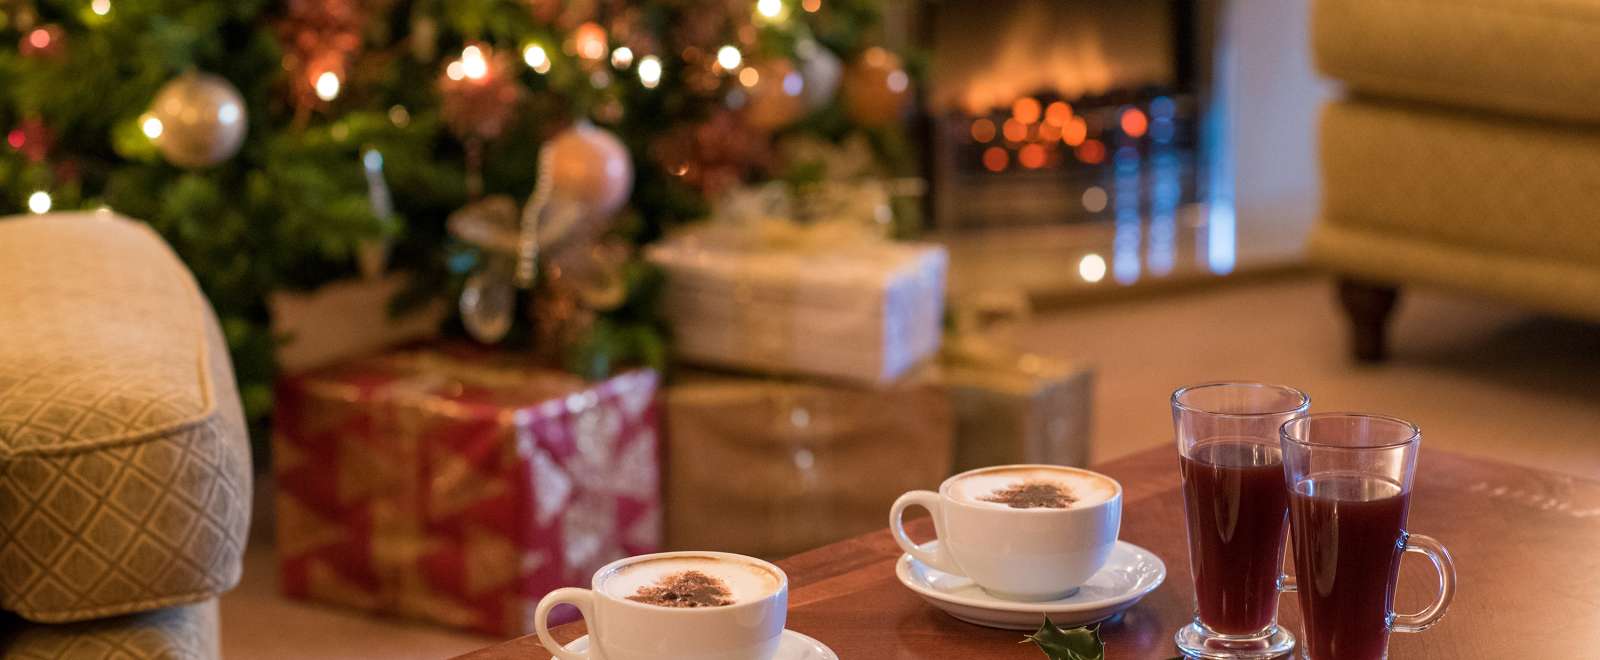 Coffee Mince Pies and Mulled Wine by Fire During Festive Season